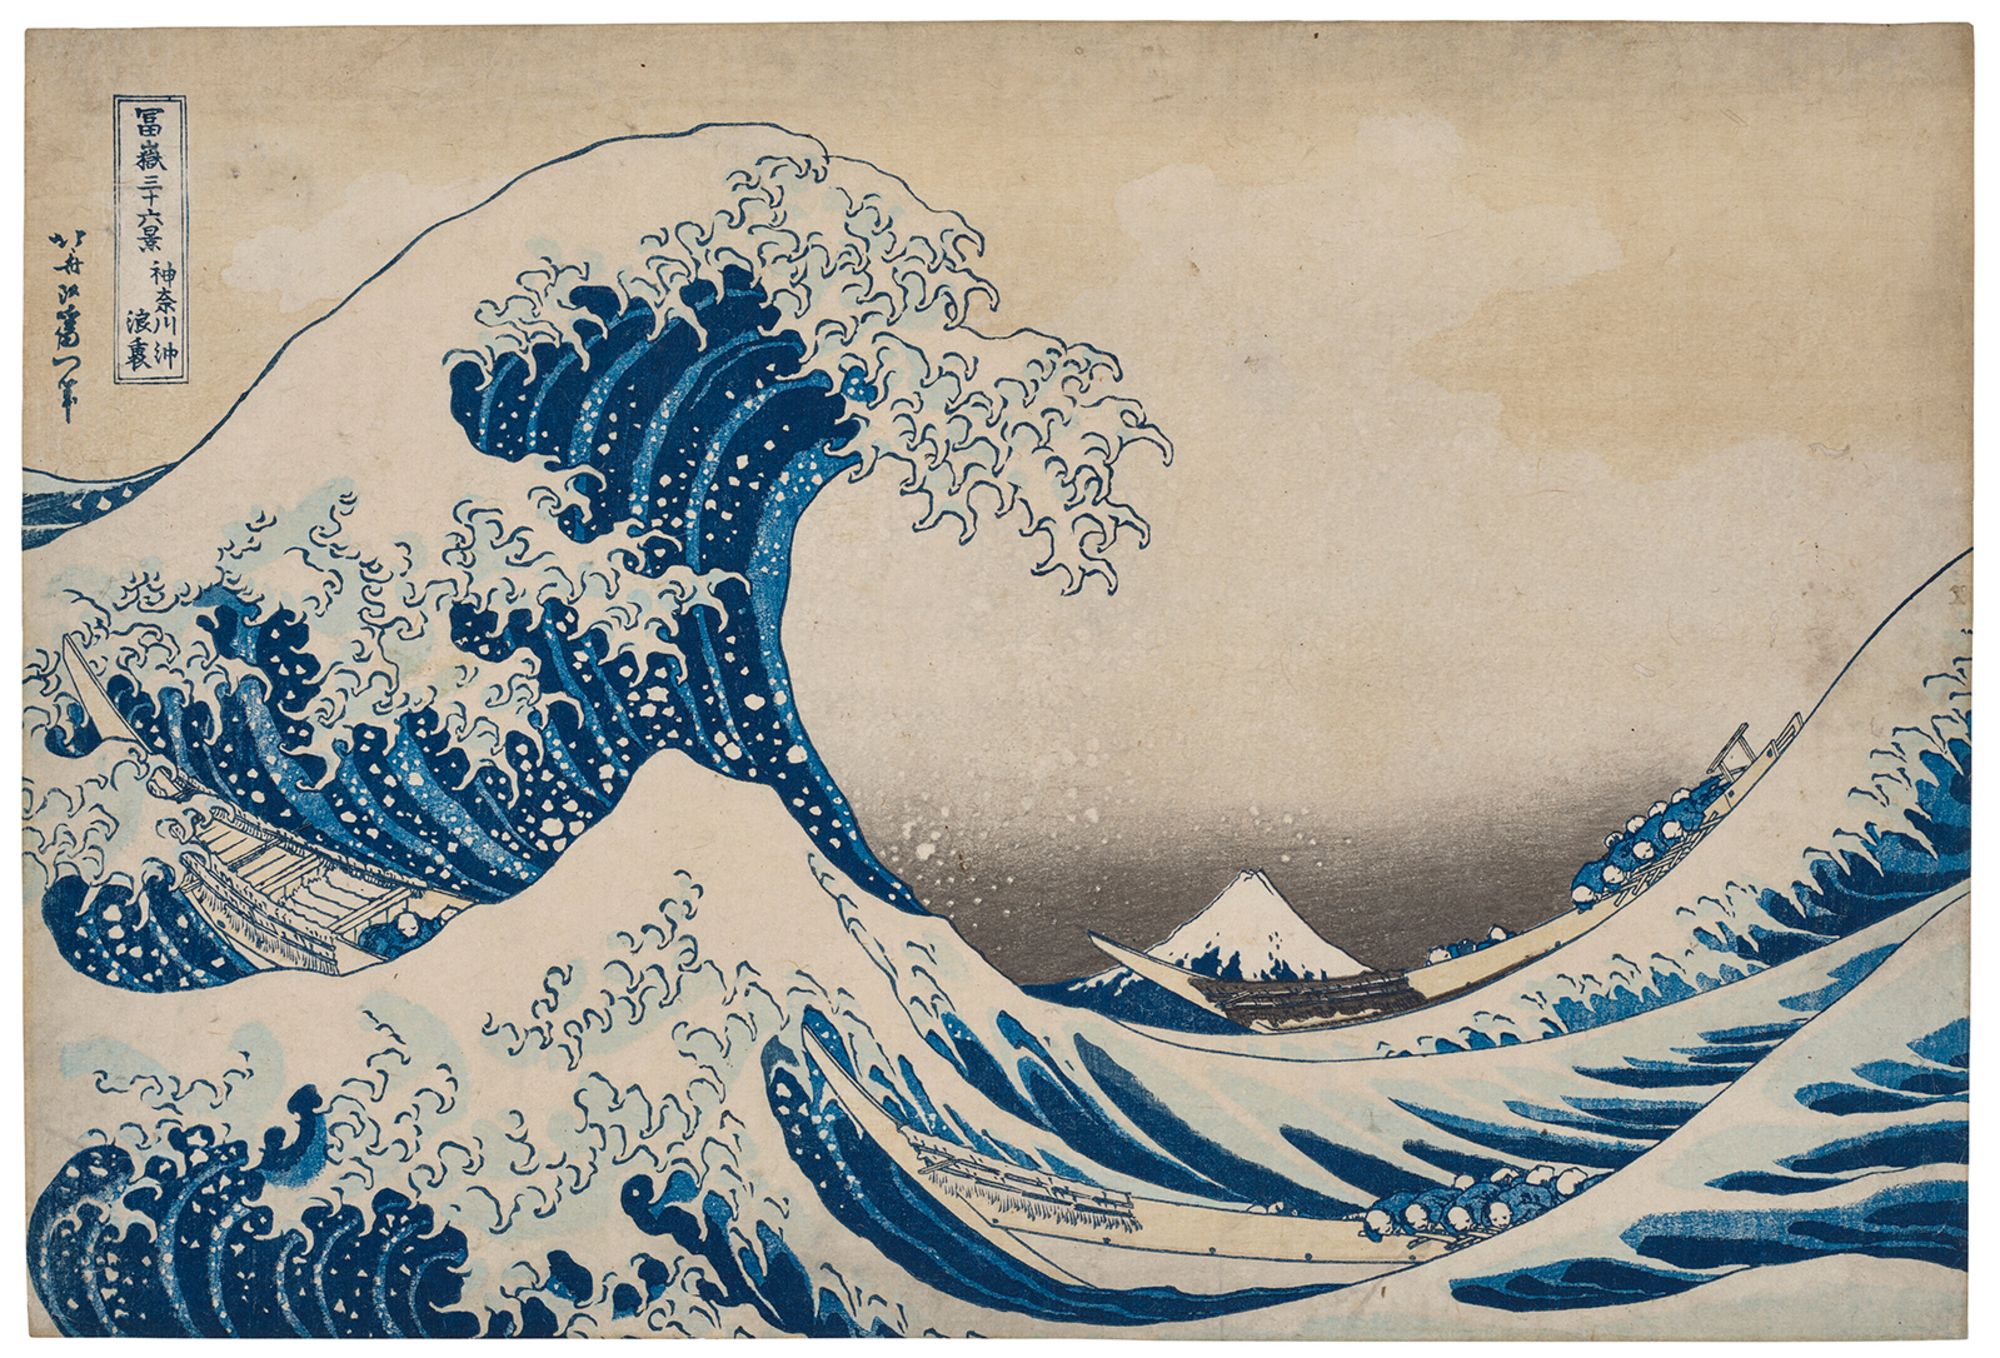 Rare print of Hokusai's 'Great Wave' sets new auction record